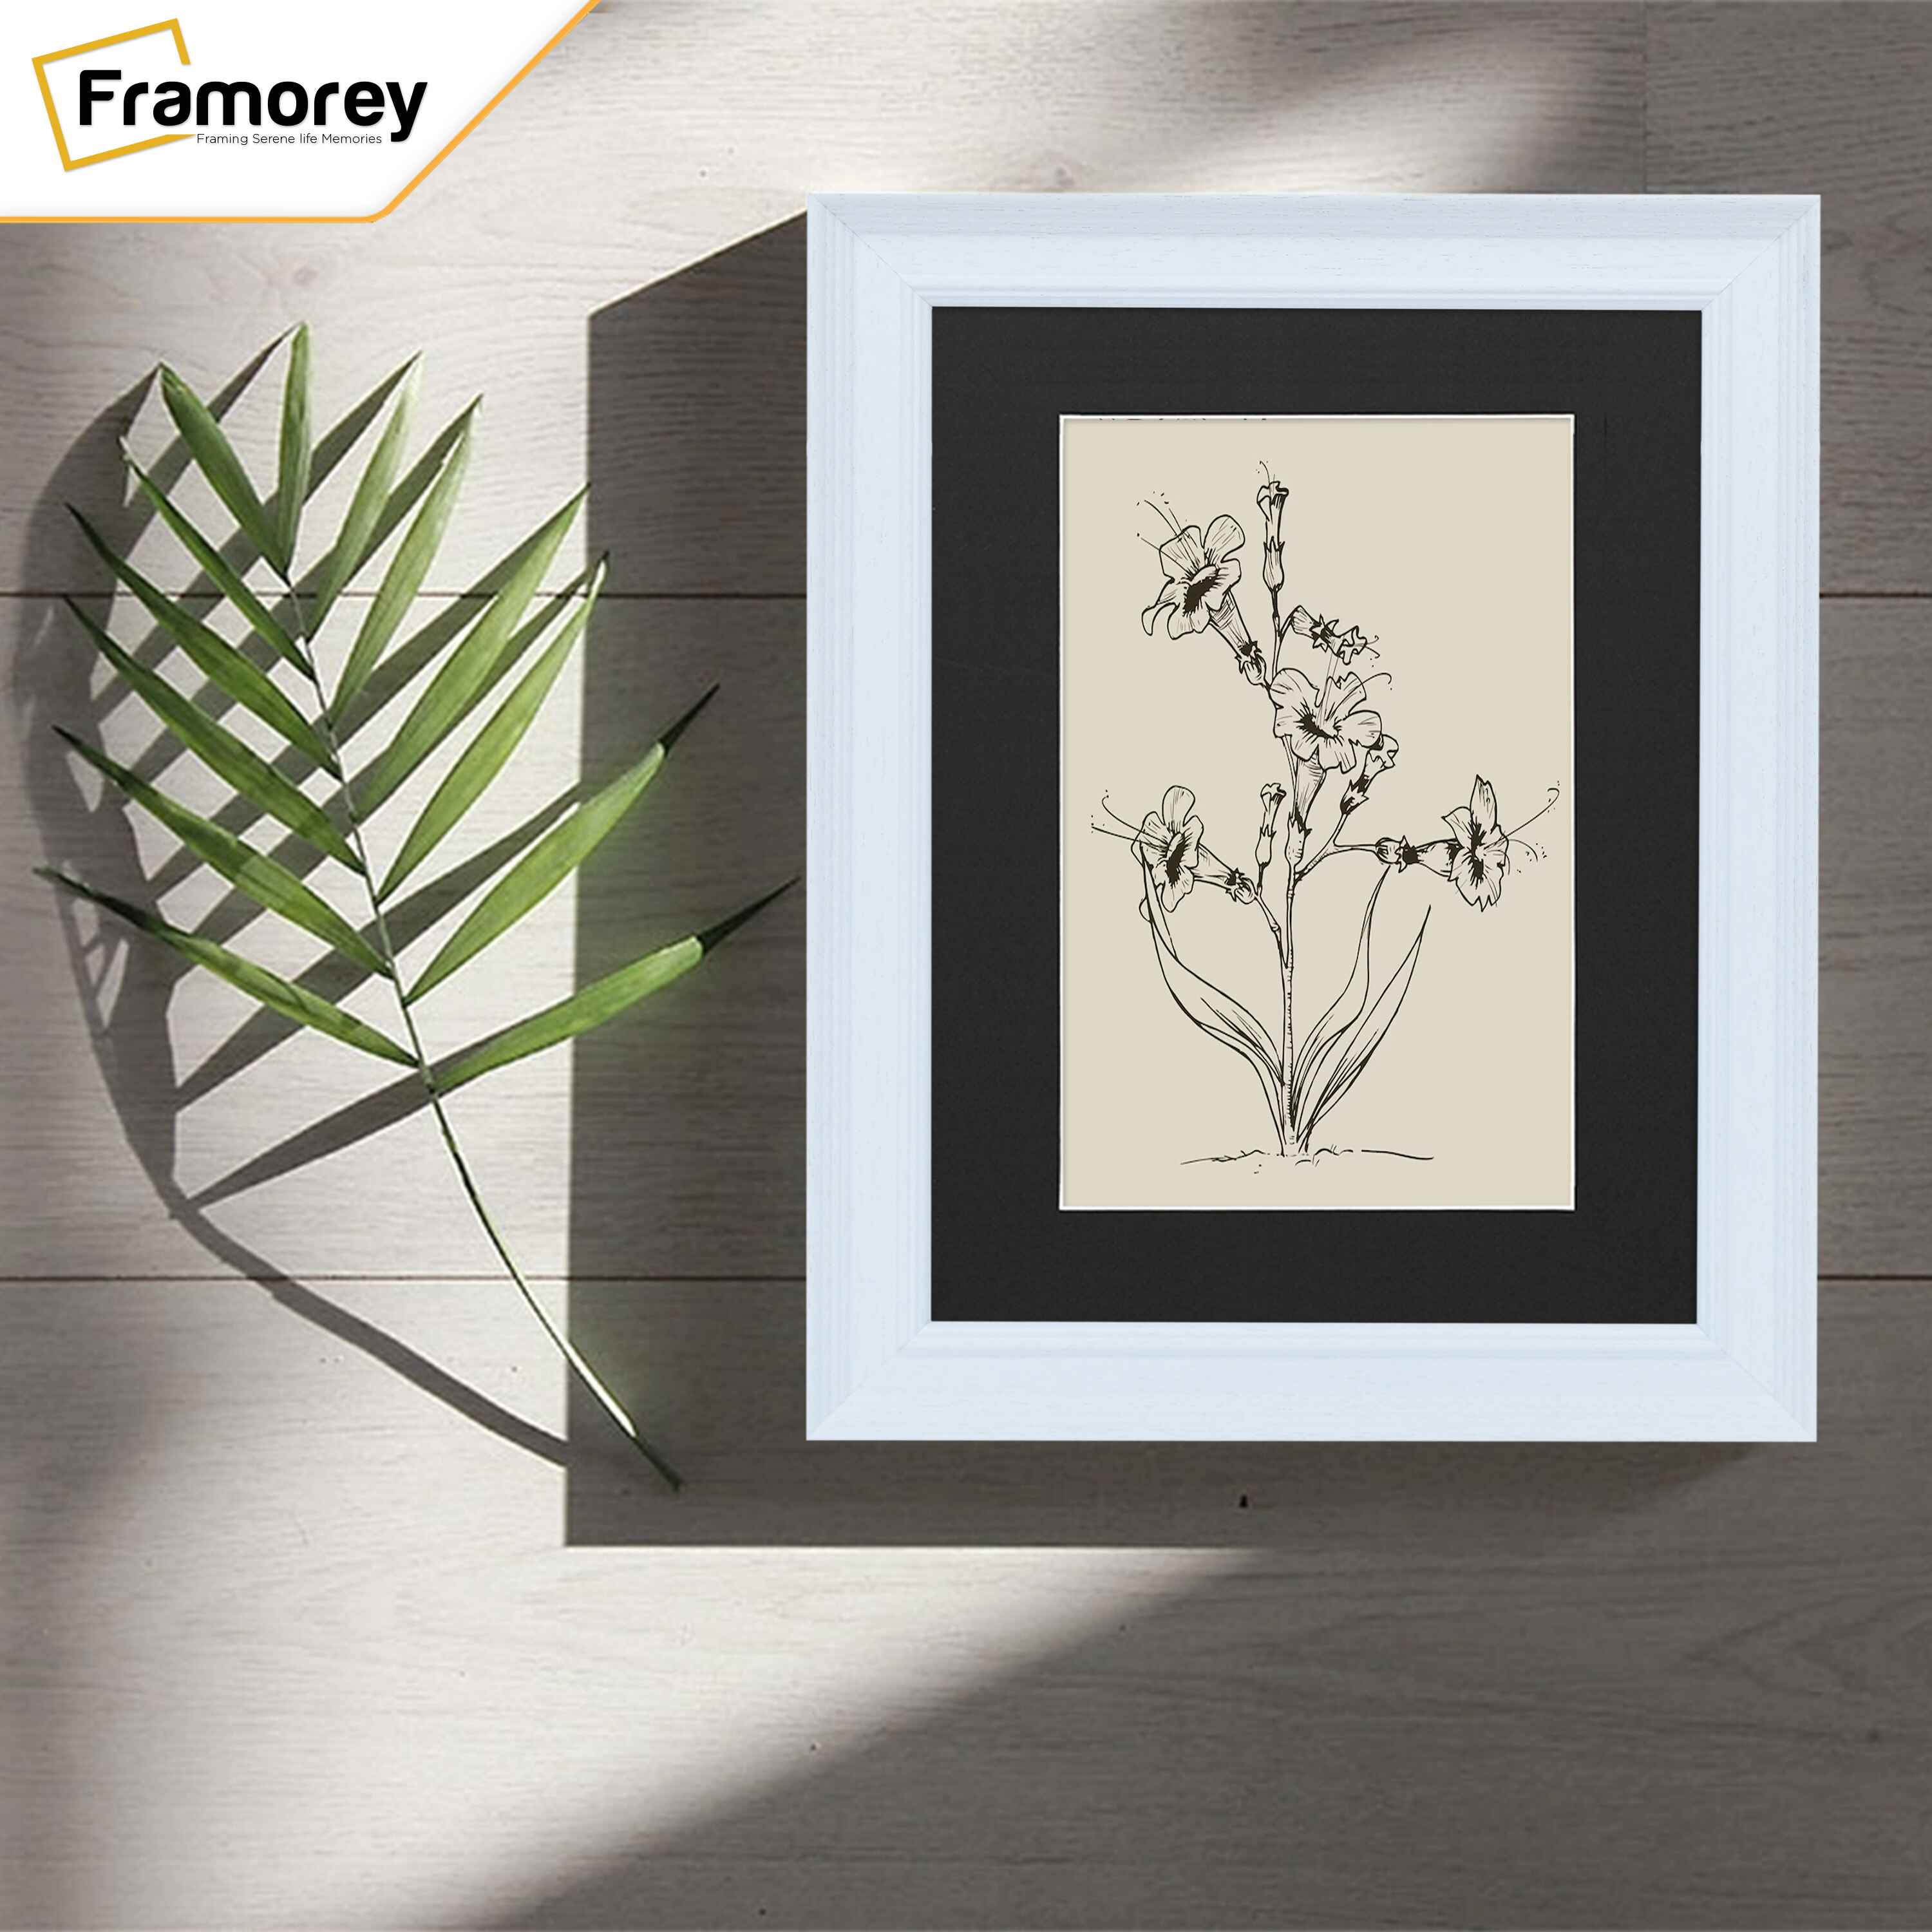 Grained White Picture Frame Fletcher Wood Wall Art Frame With Black Mount